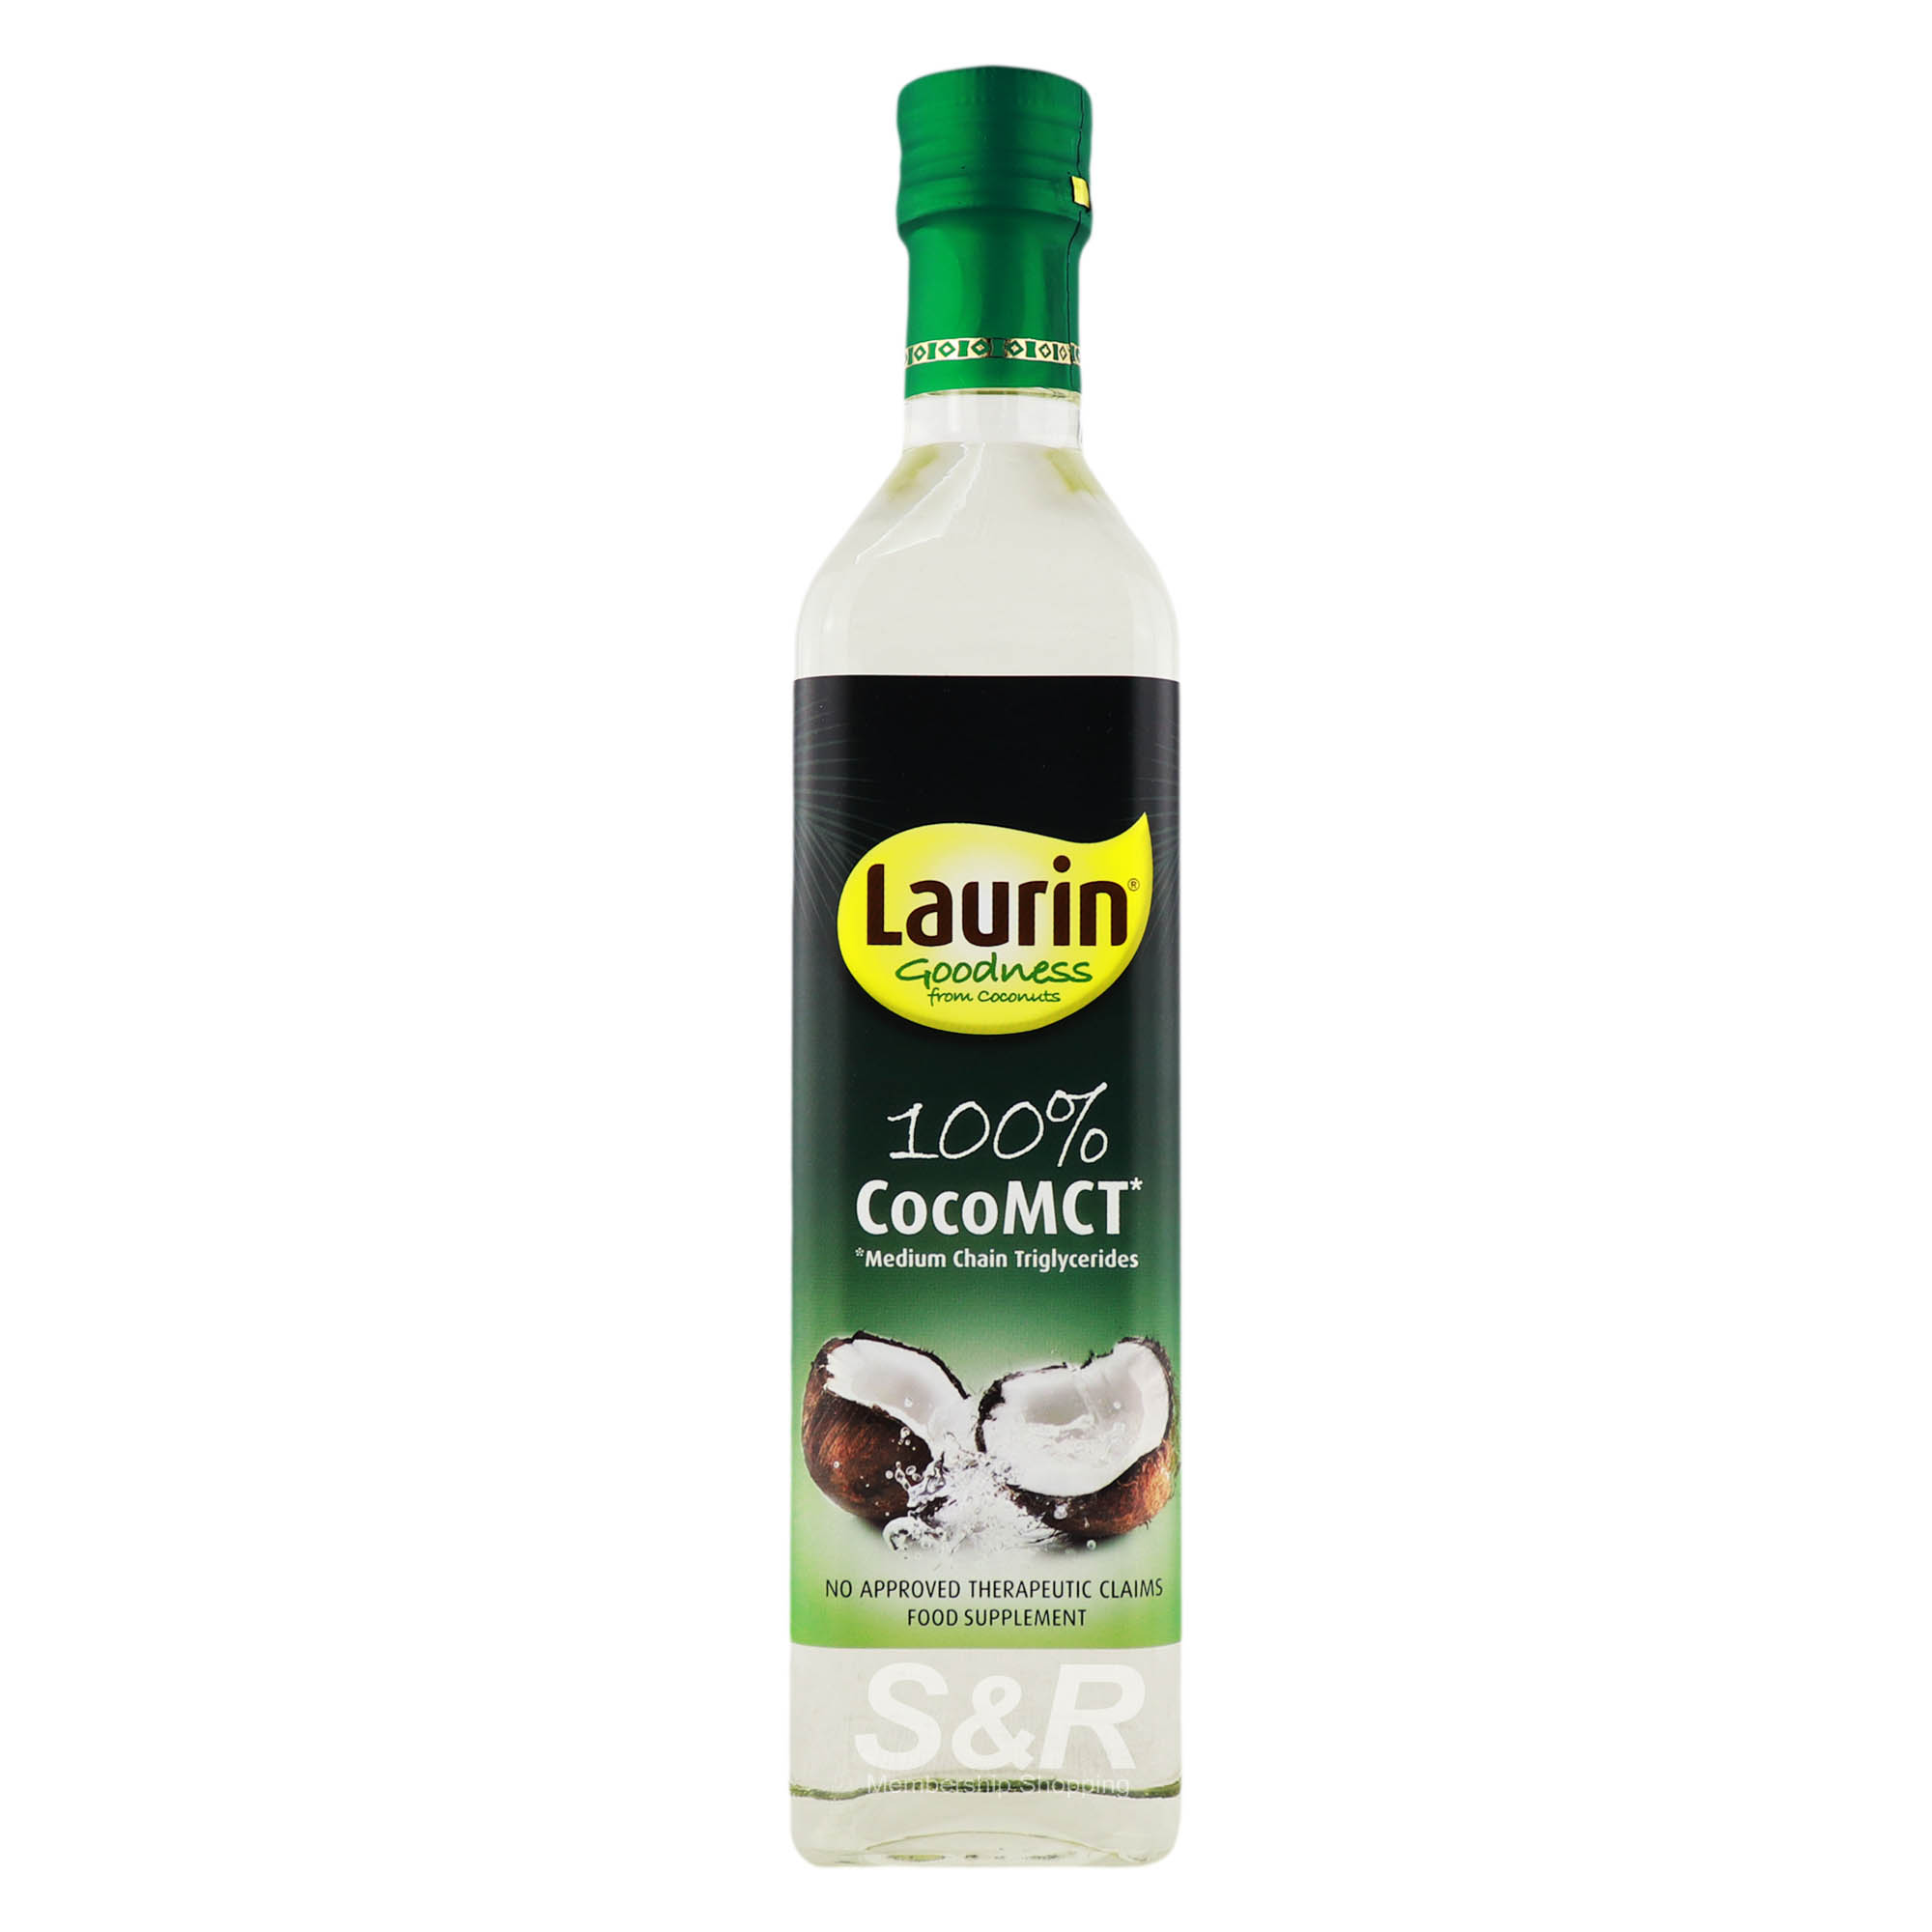 Laurin 100% Coco MCT 500mL